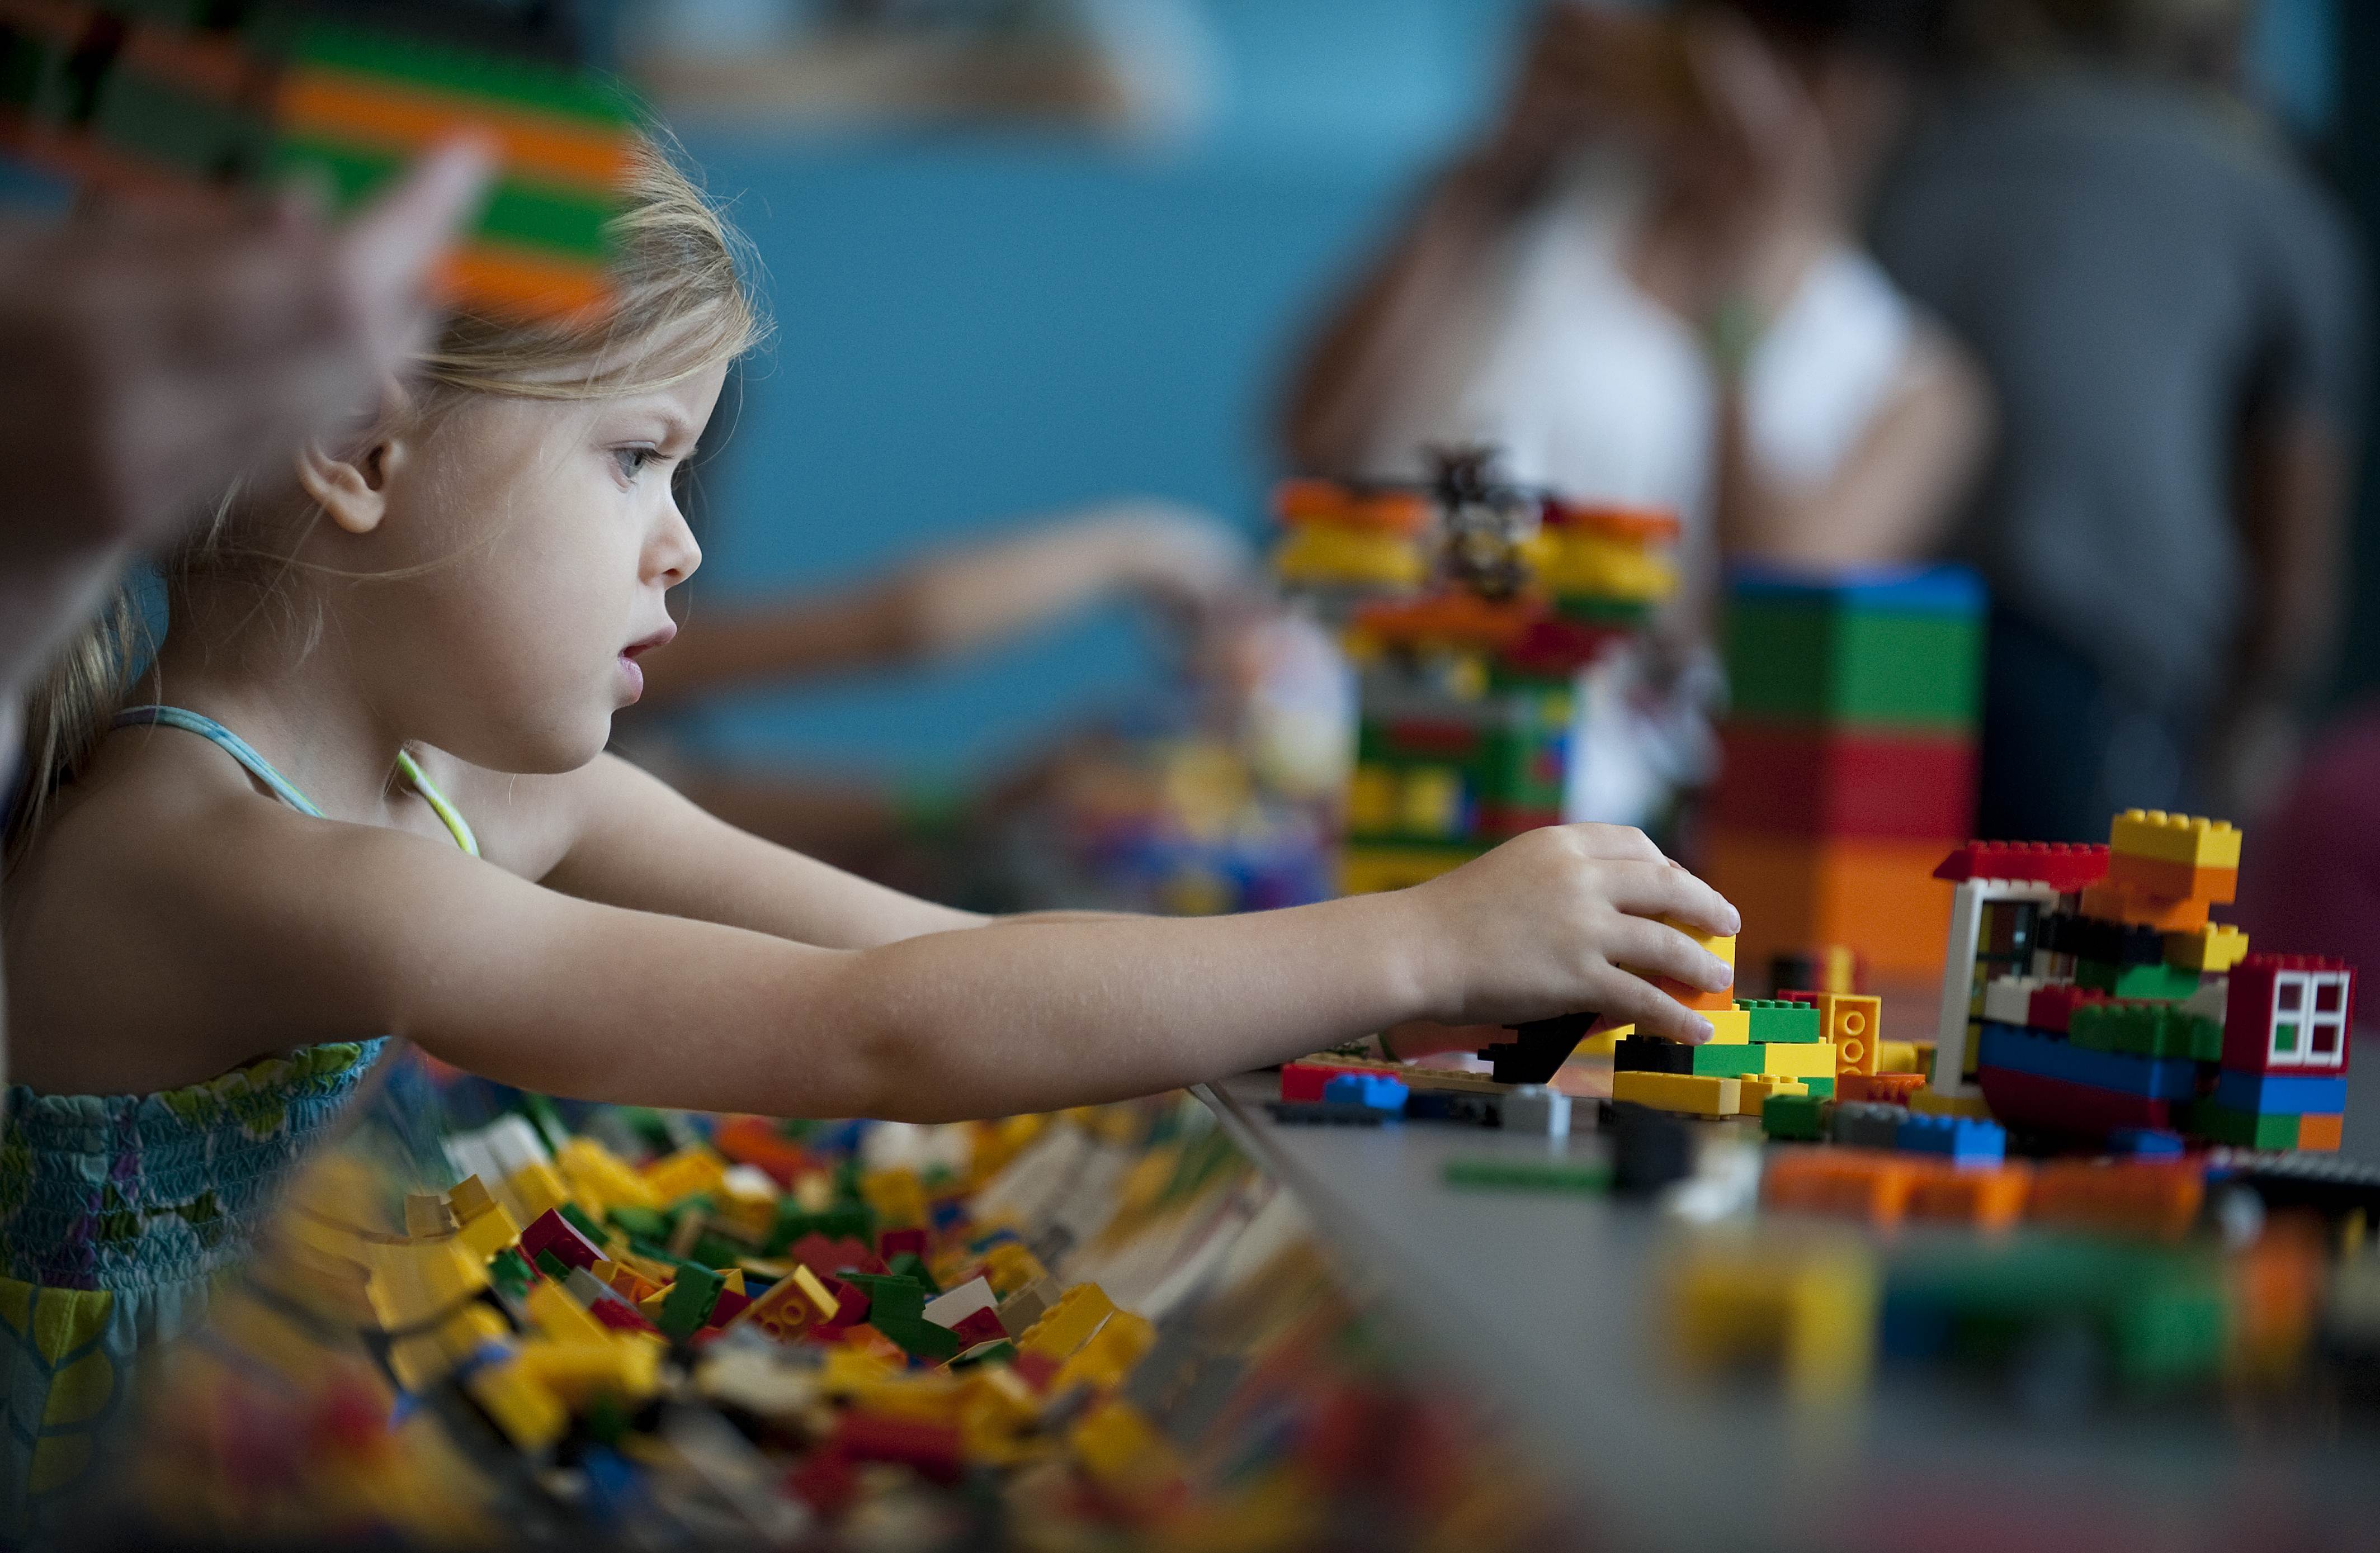 A child plays with Lego building blocks